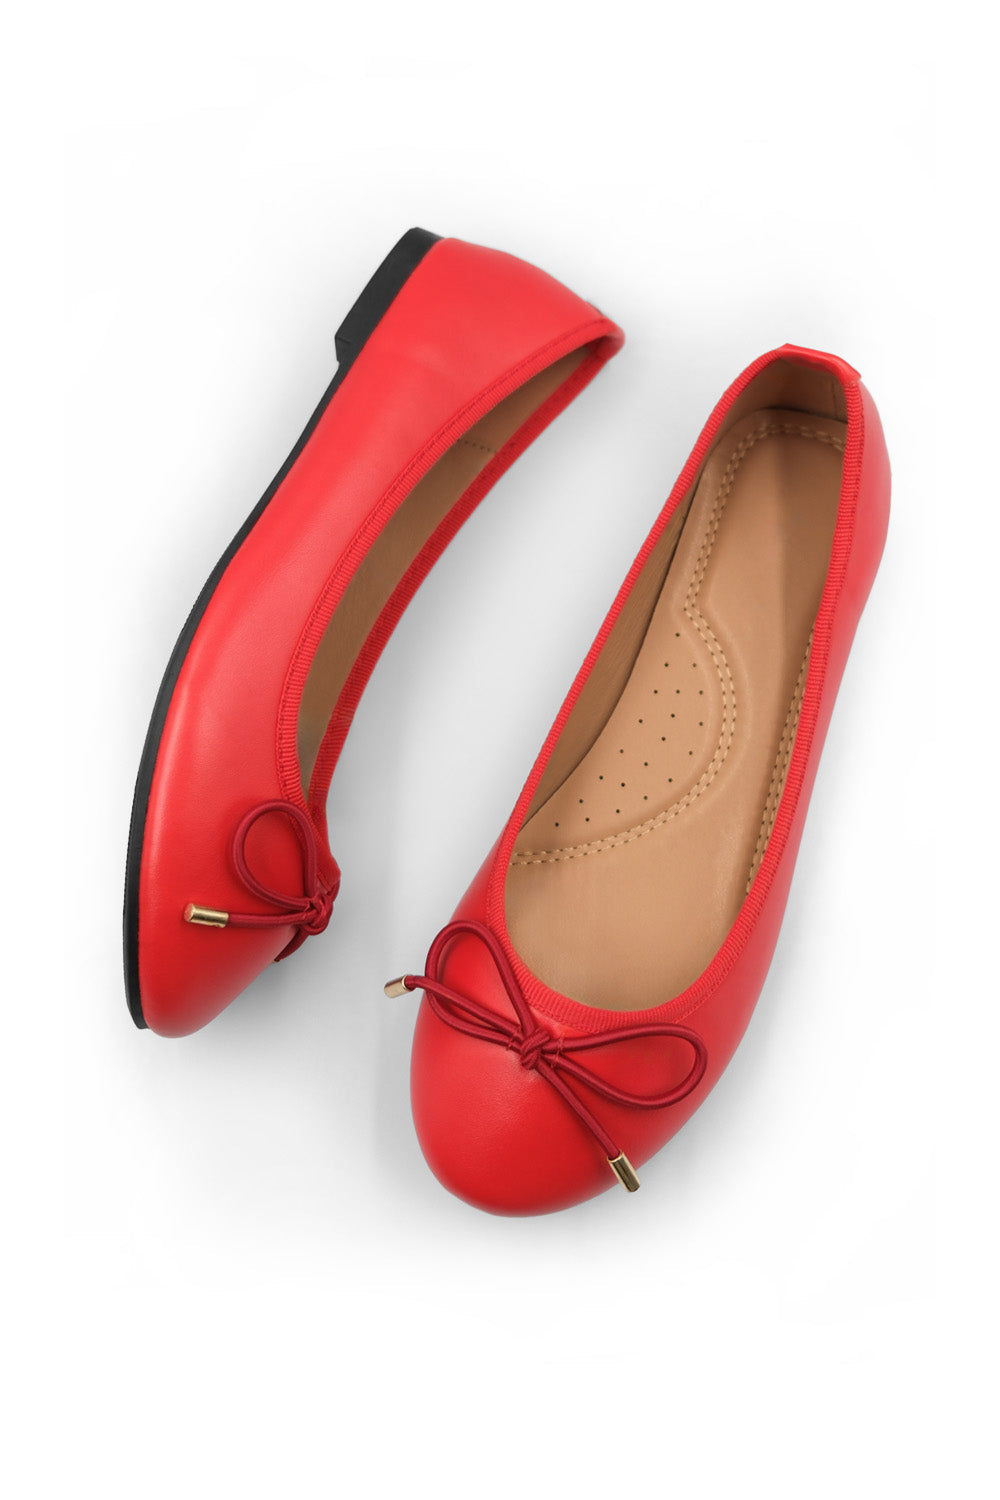 BEXLEY SLIP ON FLAT PUMPS IN RED FAUX LEATHER